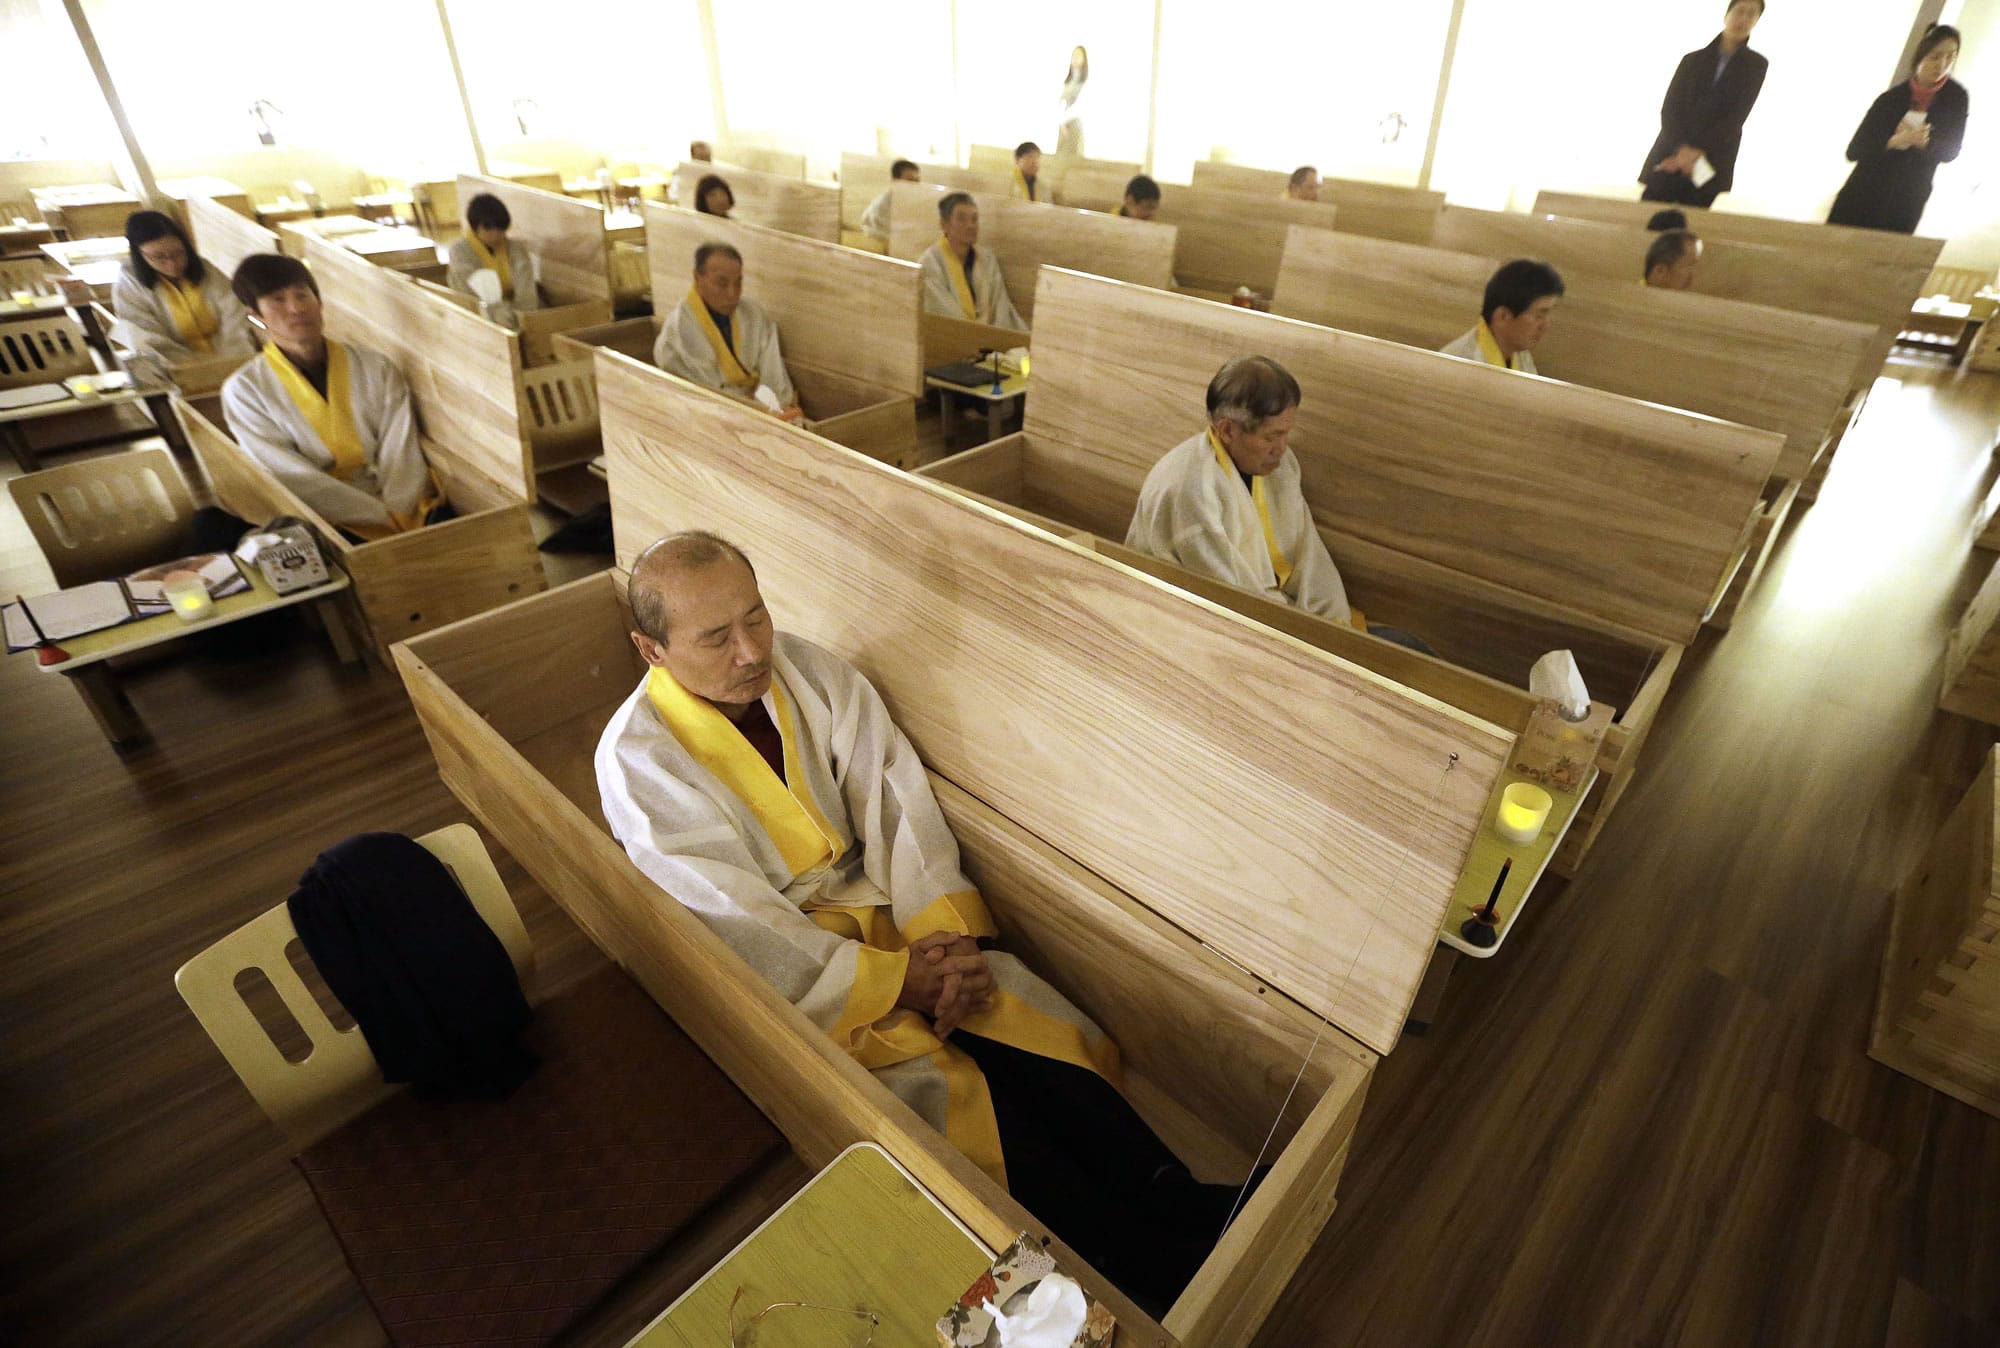 Wang Yong-yo, left bottom, sits inside a wooden coffin during the &quot;death experience&quot; program at Hyowon Healing Center in Seoul, South Korea, on Tuesday. In a dark, dimly-lit room, people dressed in white burial shrouds sit down next to dozens of coffins. They write their wills, climb into the caskets, lie down and a symbolic ?angel of death?